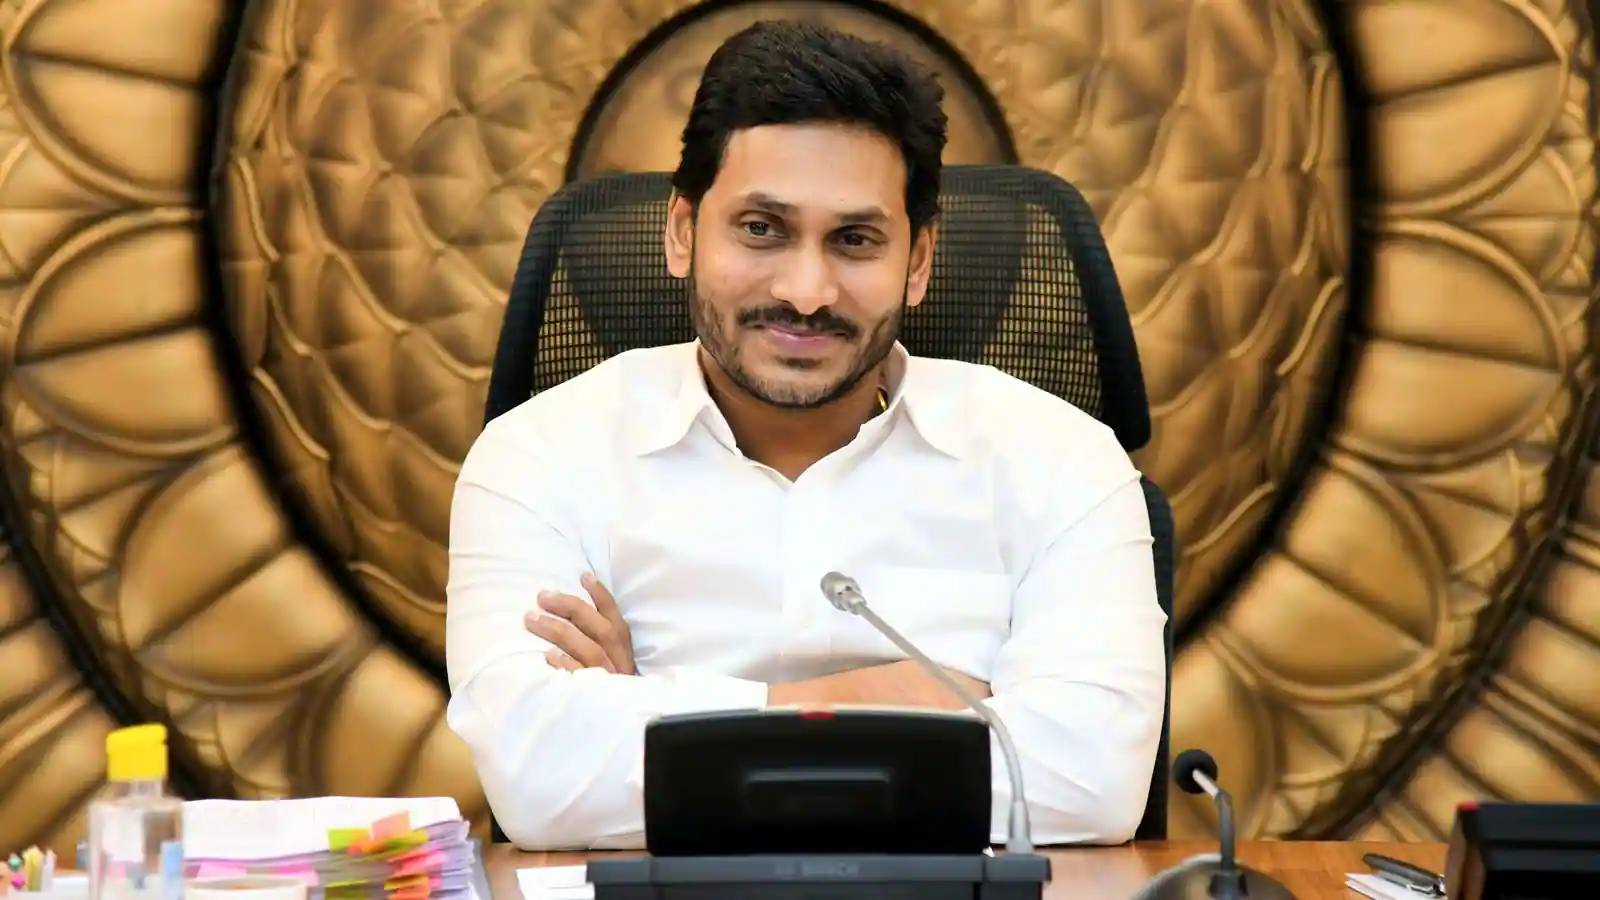 In a public meeting on November 11, where CM Jagan Reddy met PM Modi, the Andhra Pradesh CM asked Modi about the status of special status category being given to AP, according to TeluguStop.